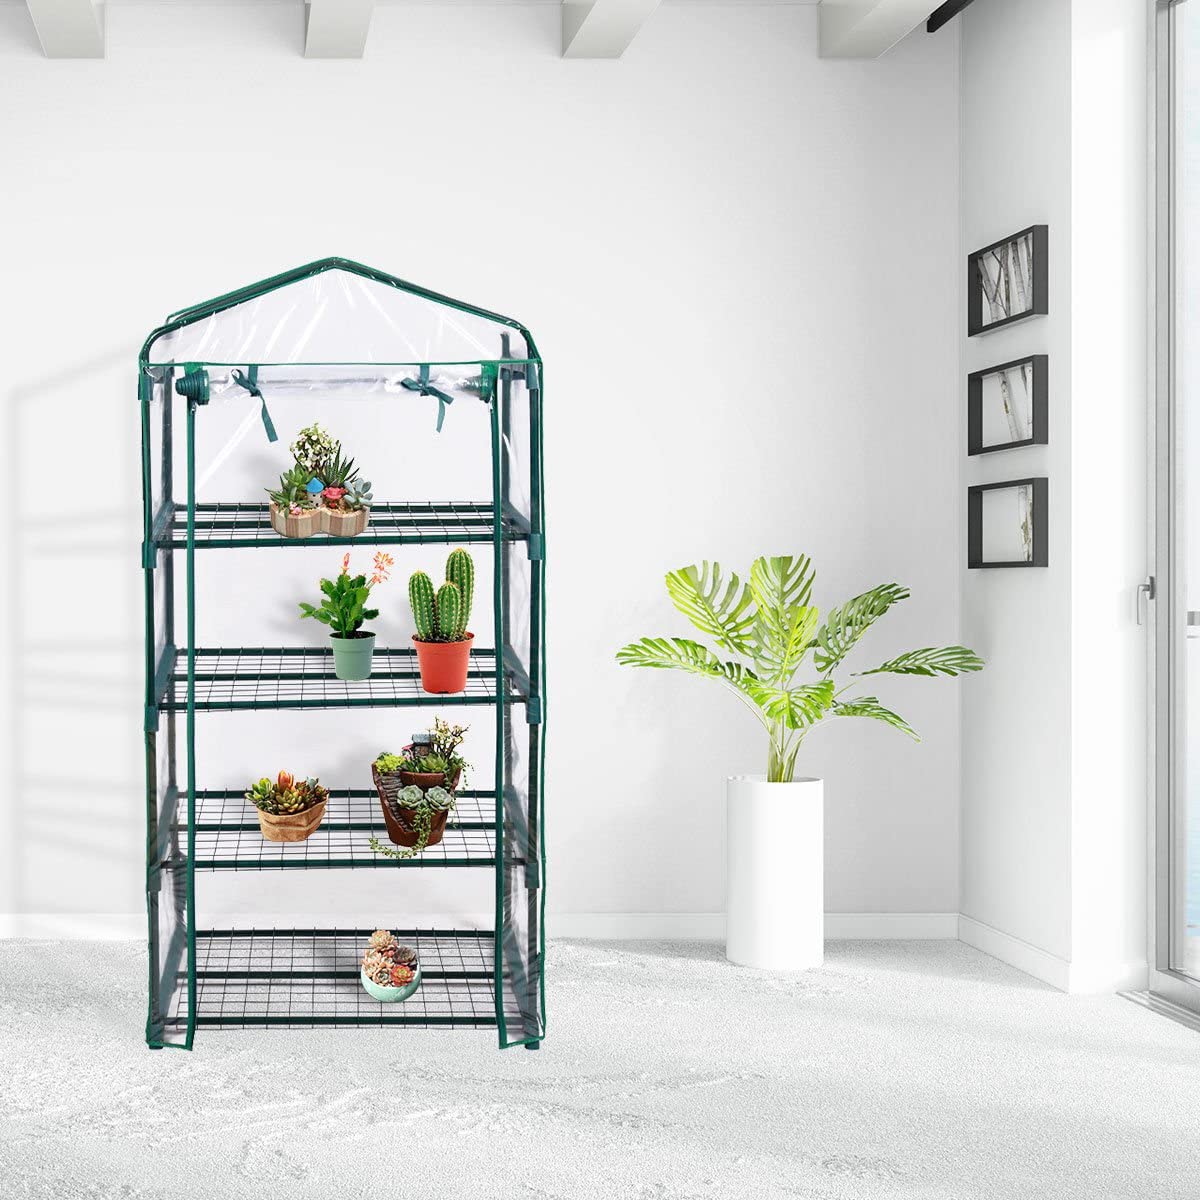 Outdoor Portable Greenhouse Multi Tier Shelves Stands Small Shelving Green House